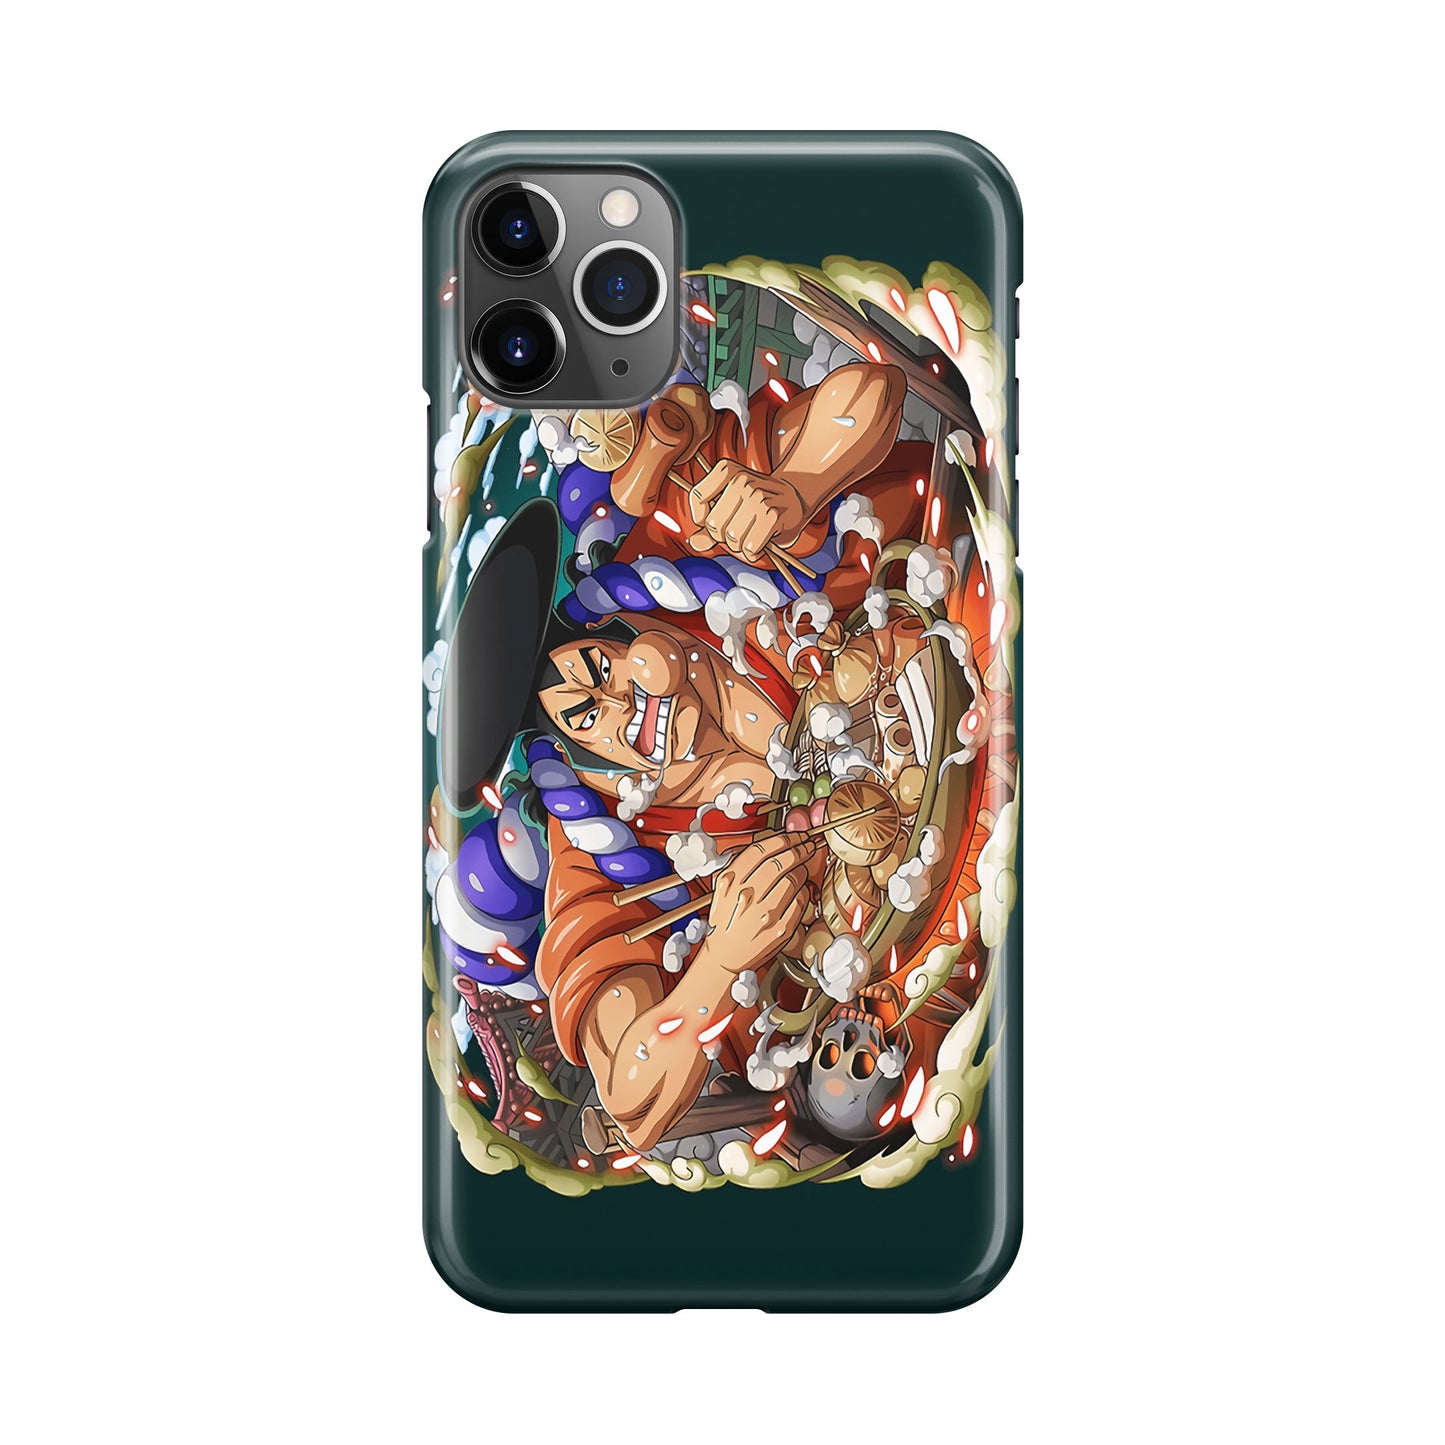 Kozuki Oden Eating Oden iPhone 11 Pro Max Case